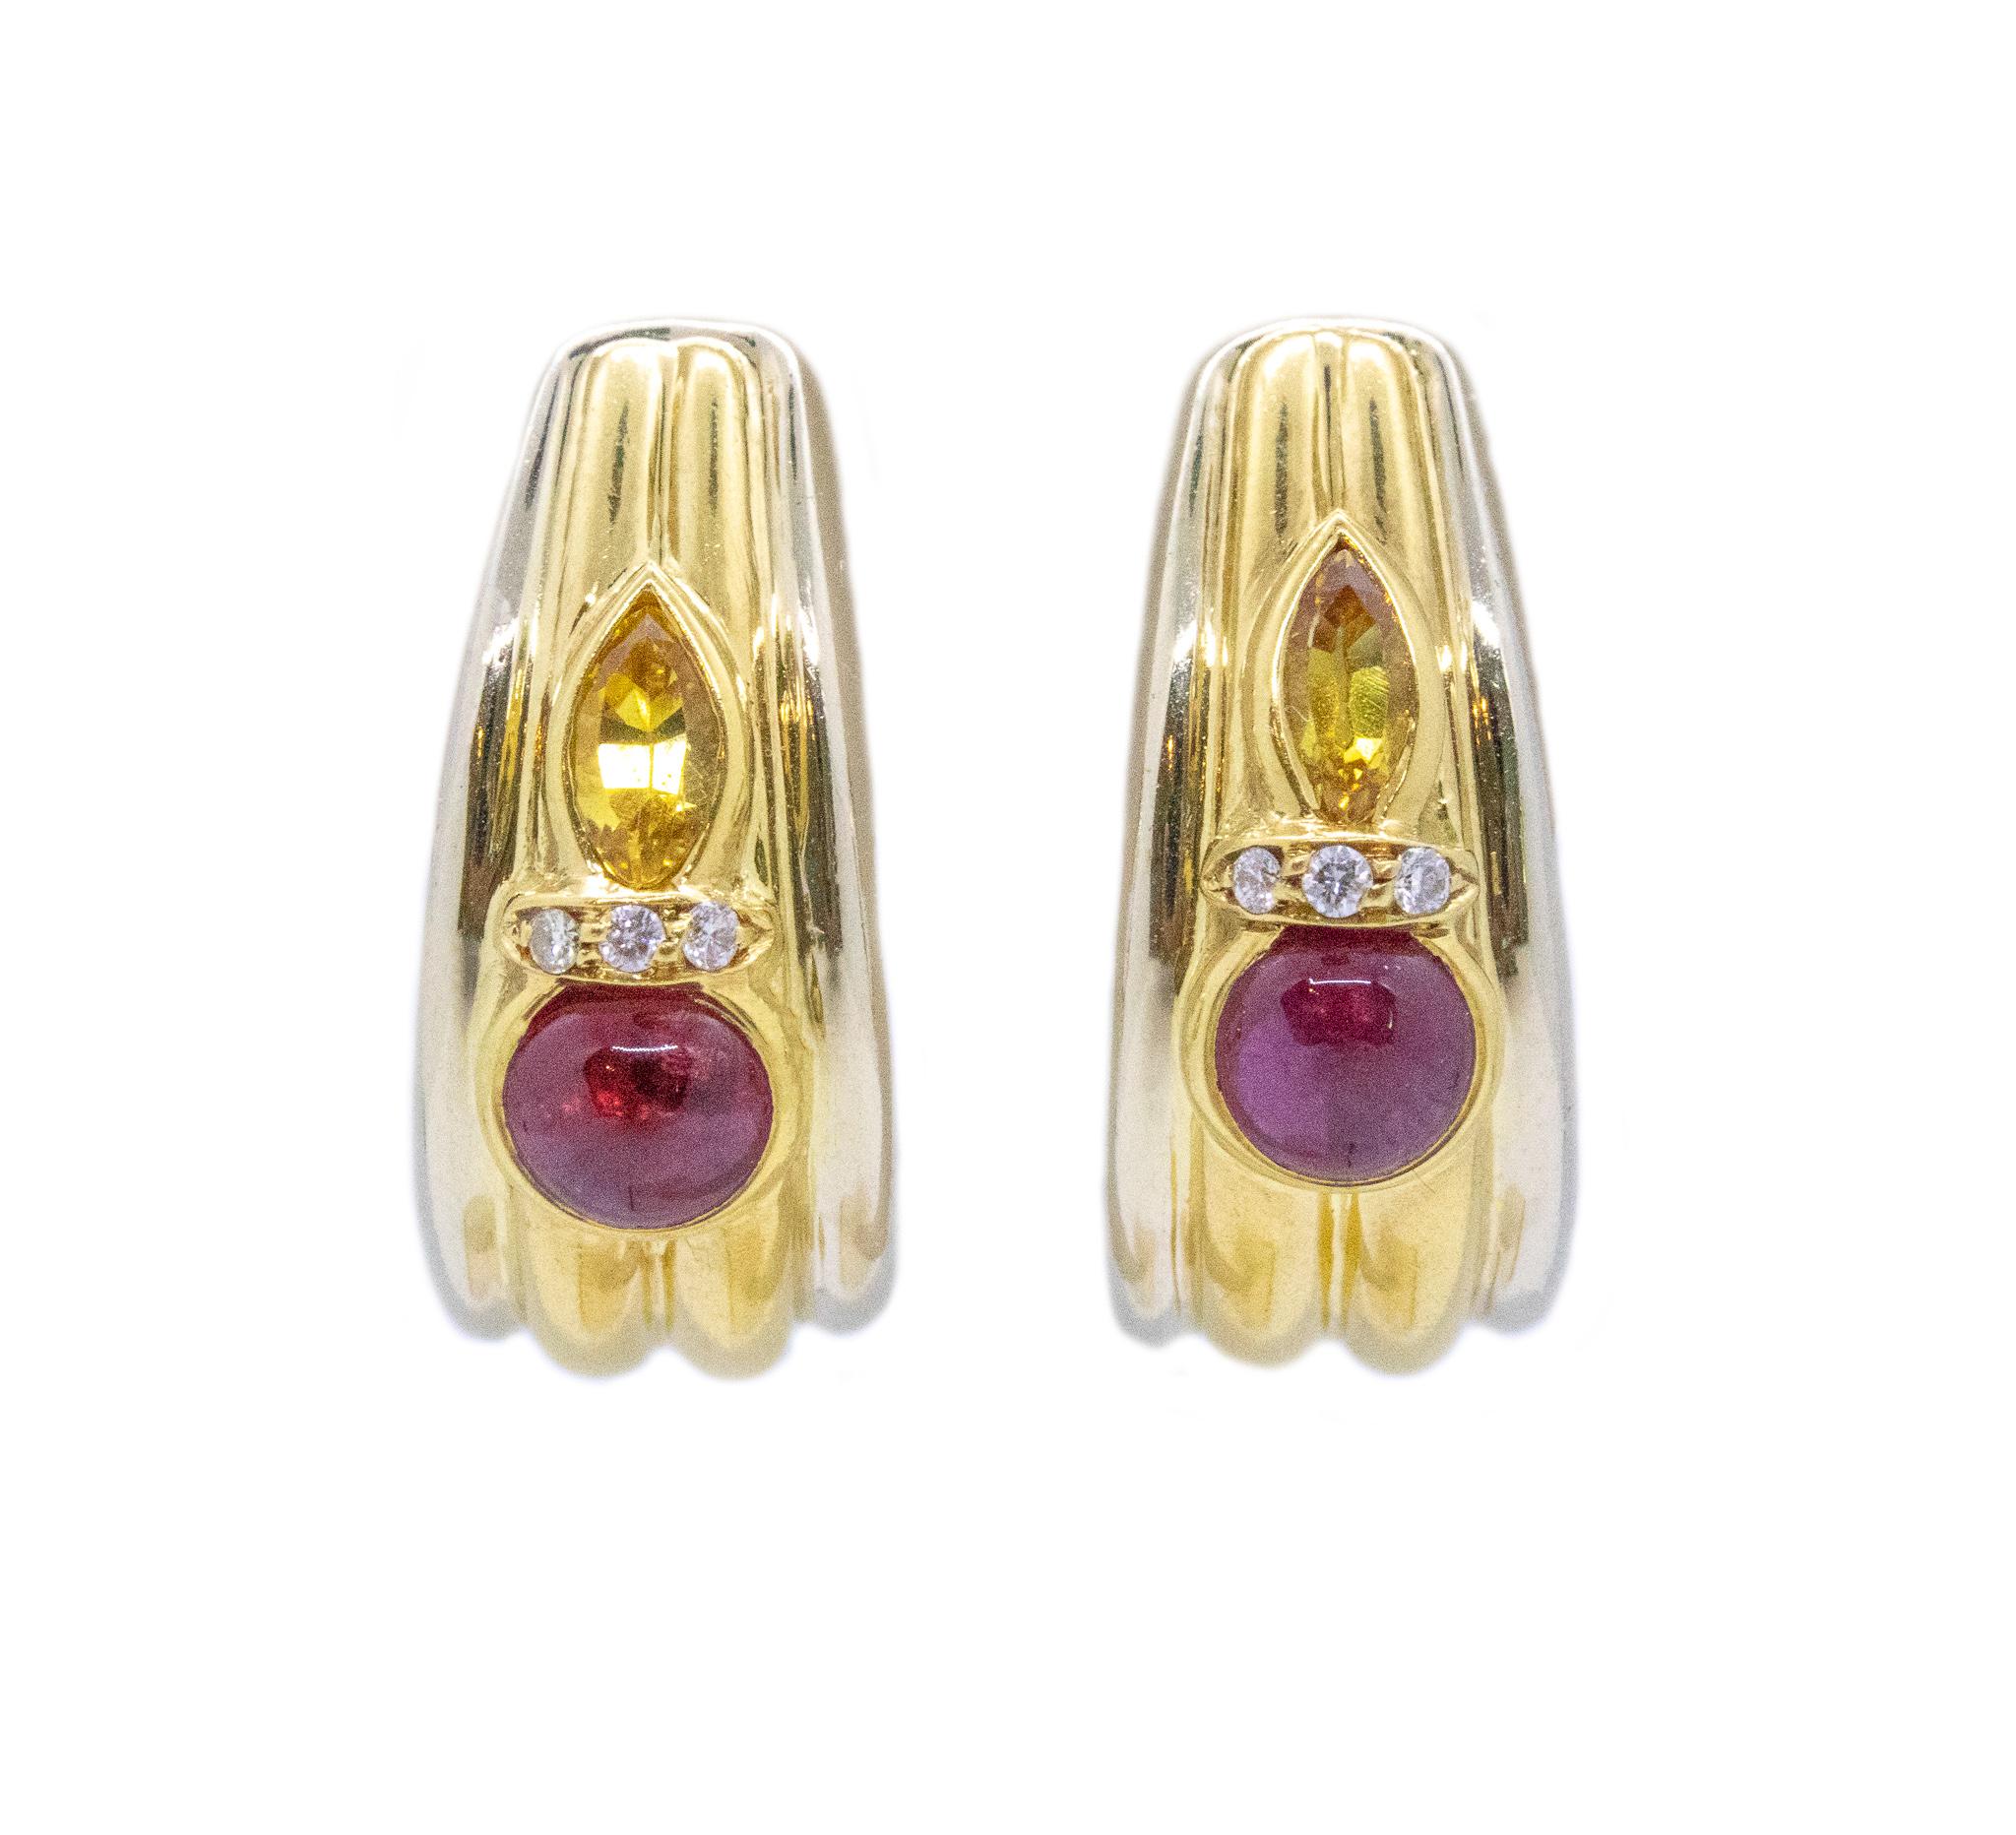 Modernist Chaumet Paris Clips Earrings in 18Kt Gold with 2.34 Cts Rubies Sapphires Diamond For Sale